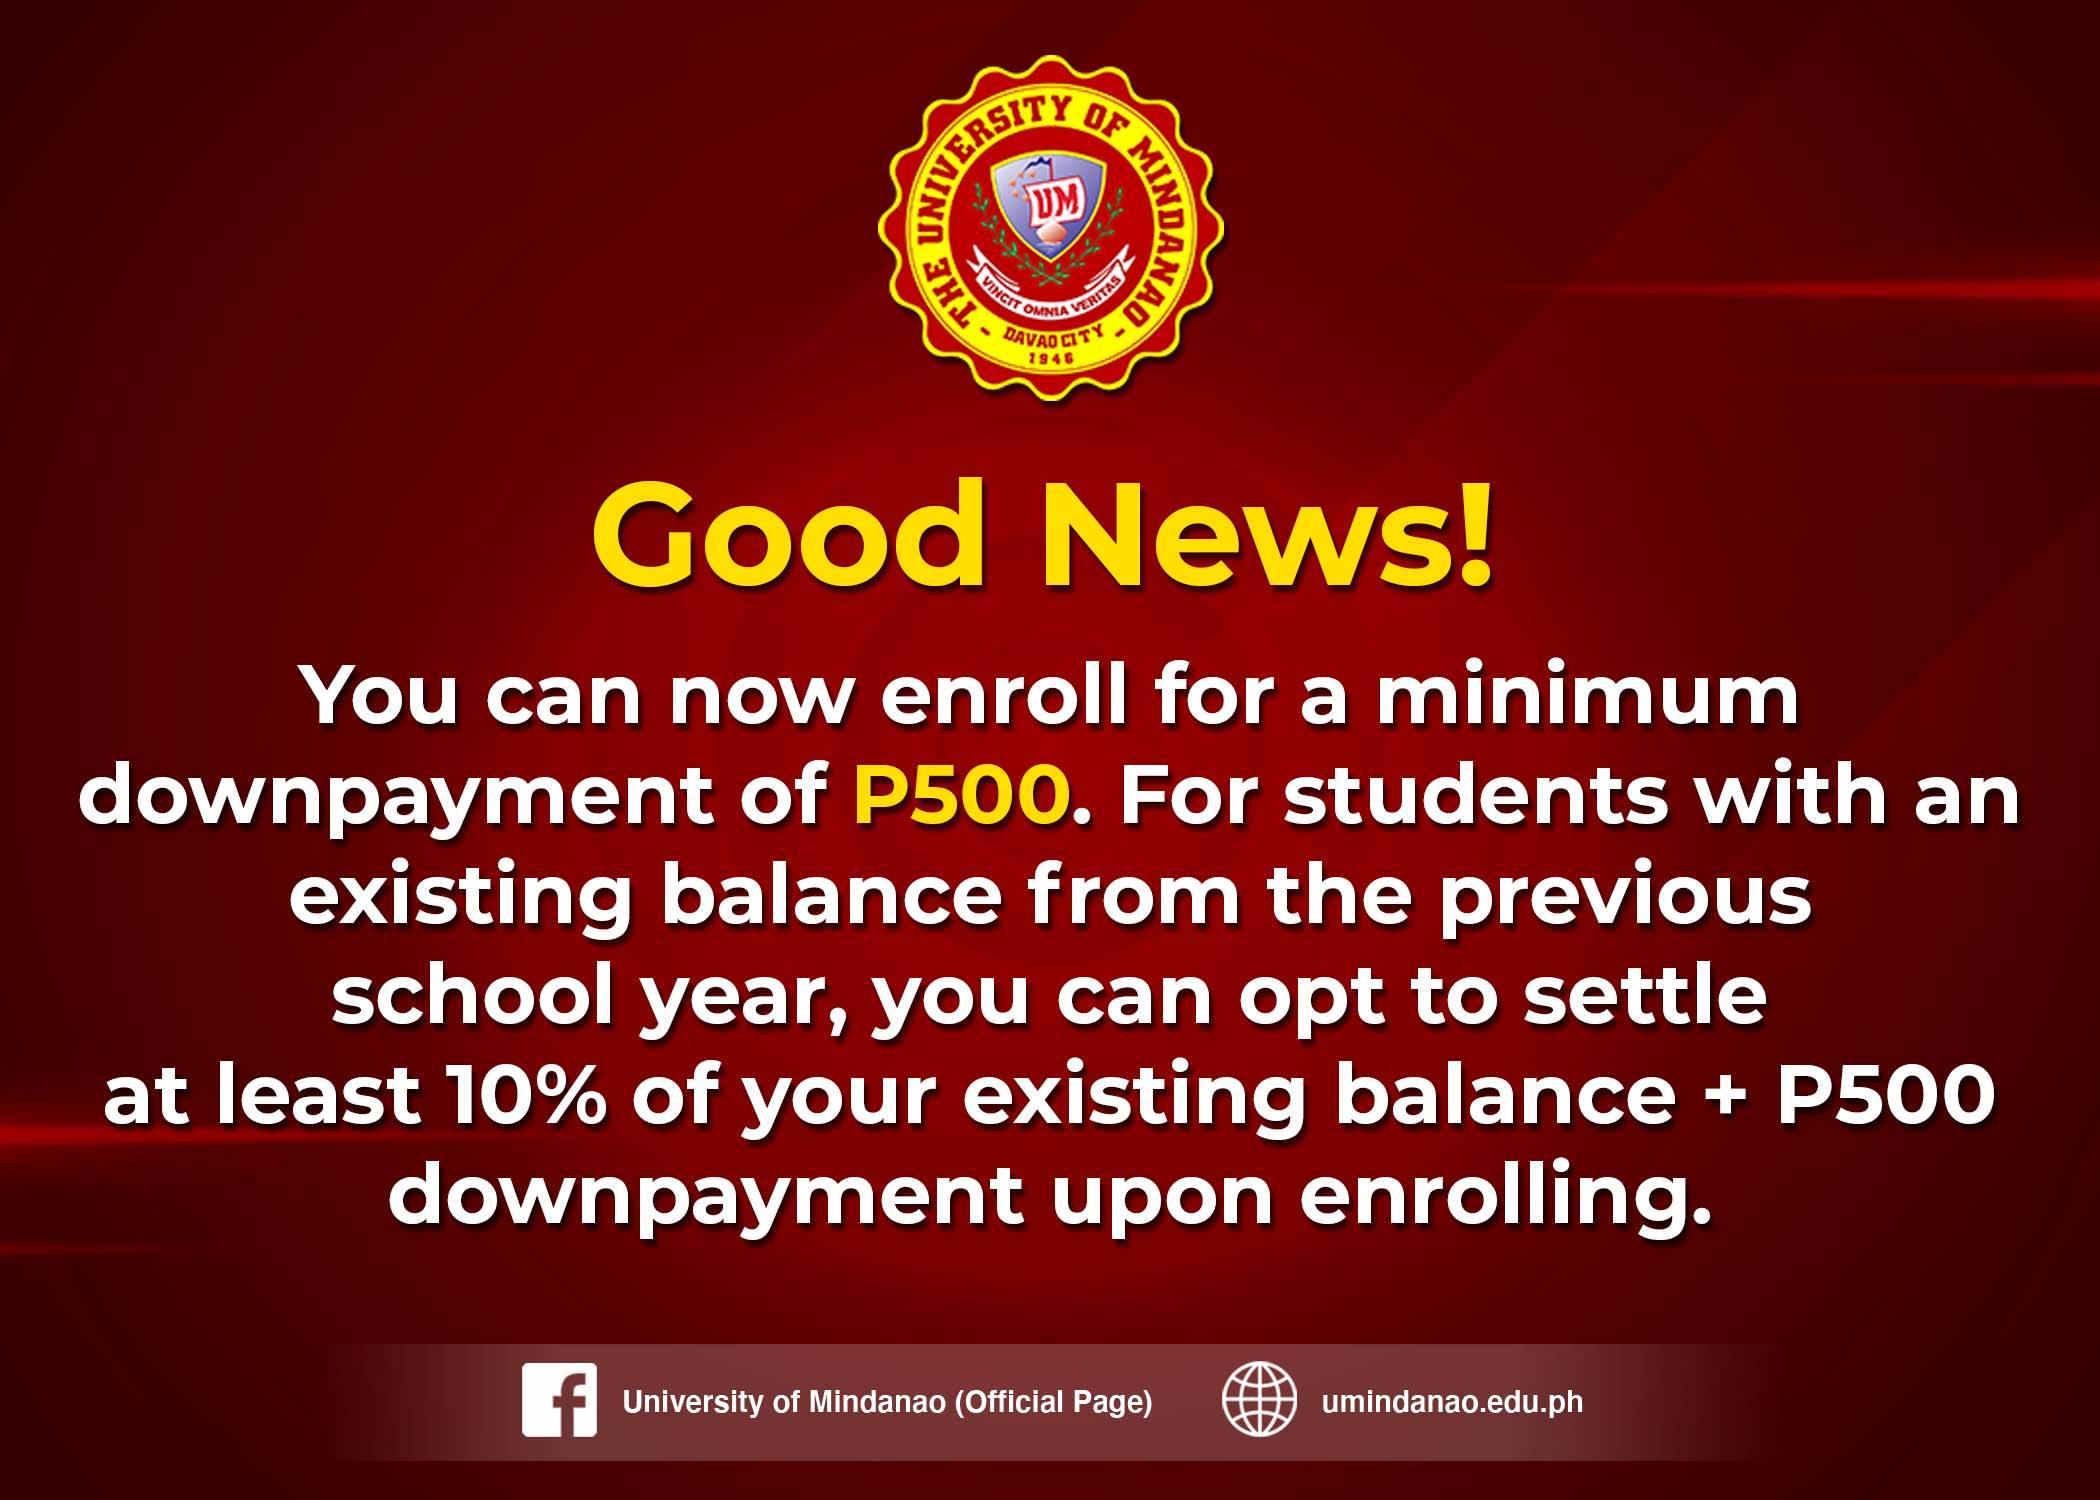 Downpayment is now at P500, Ga!